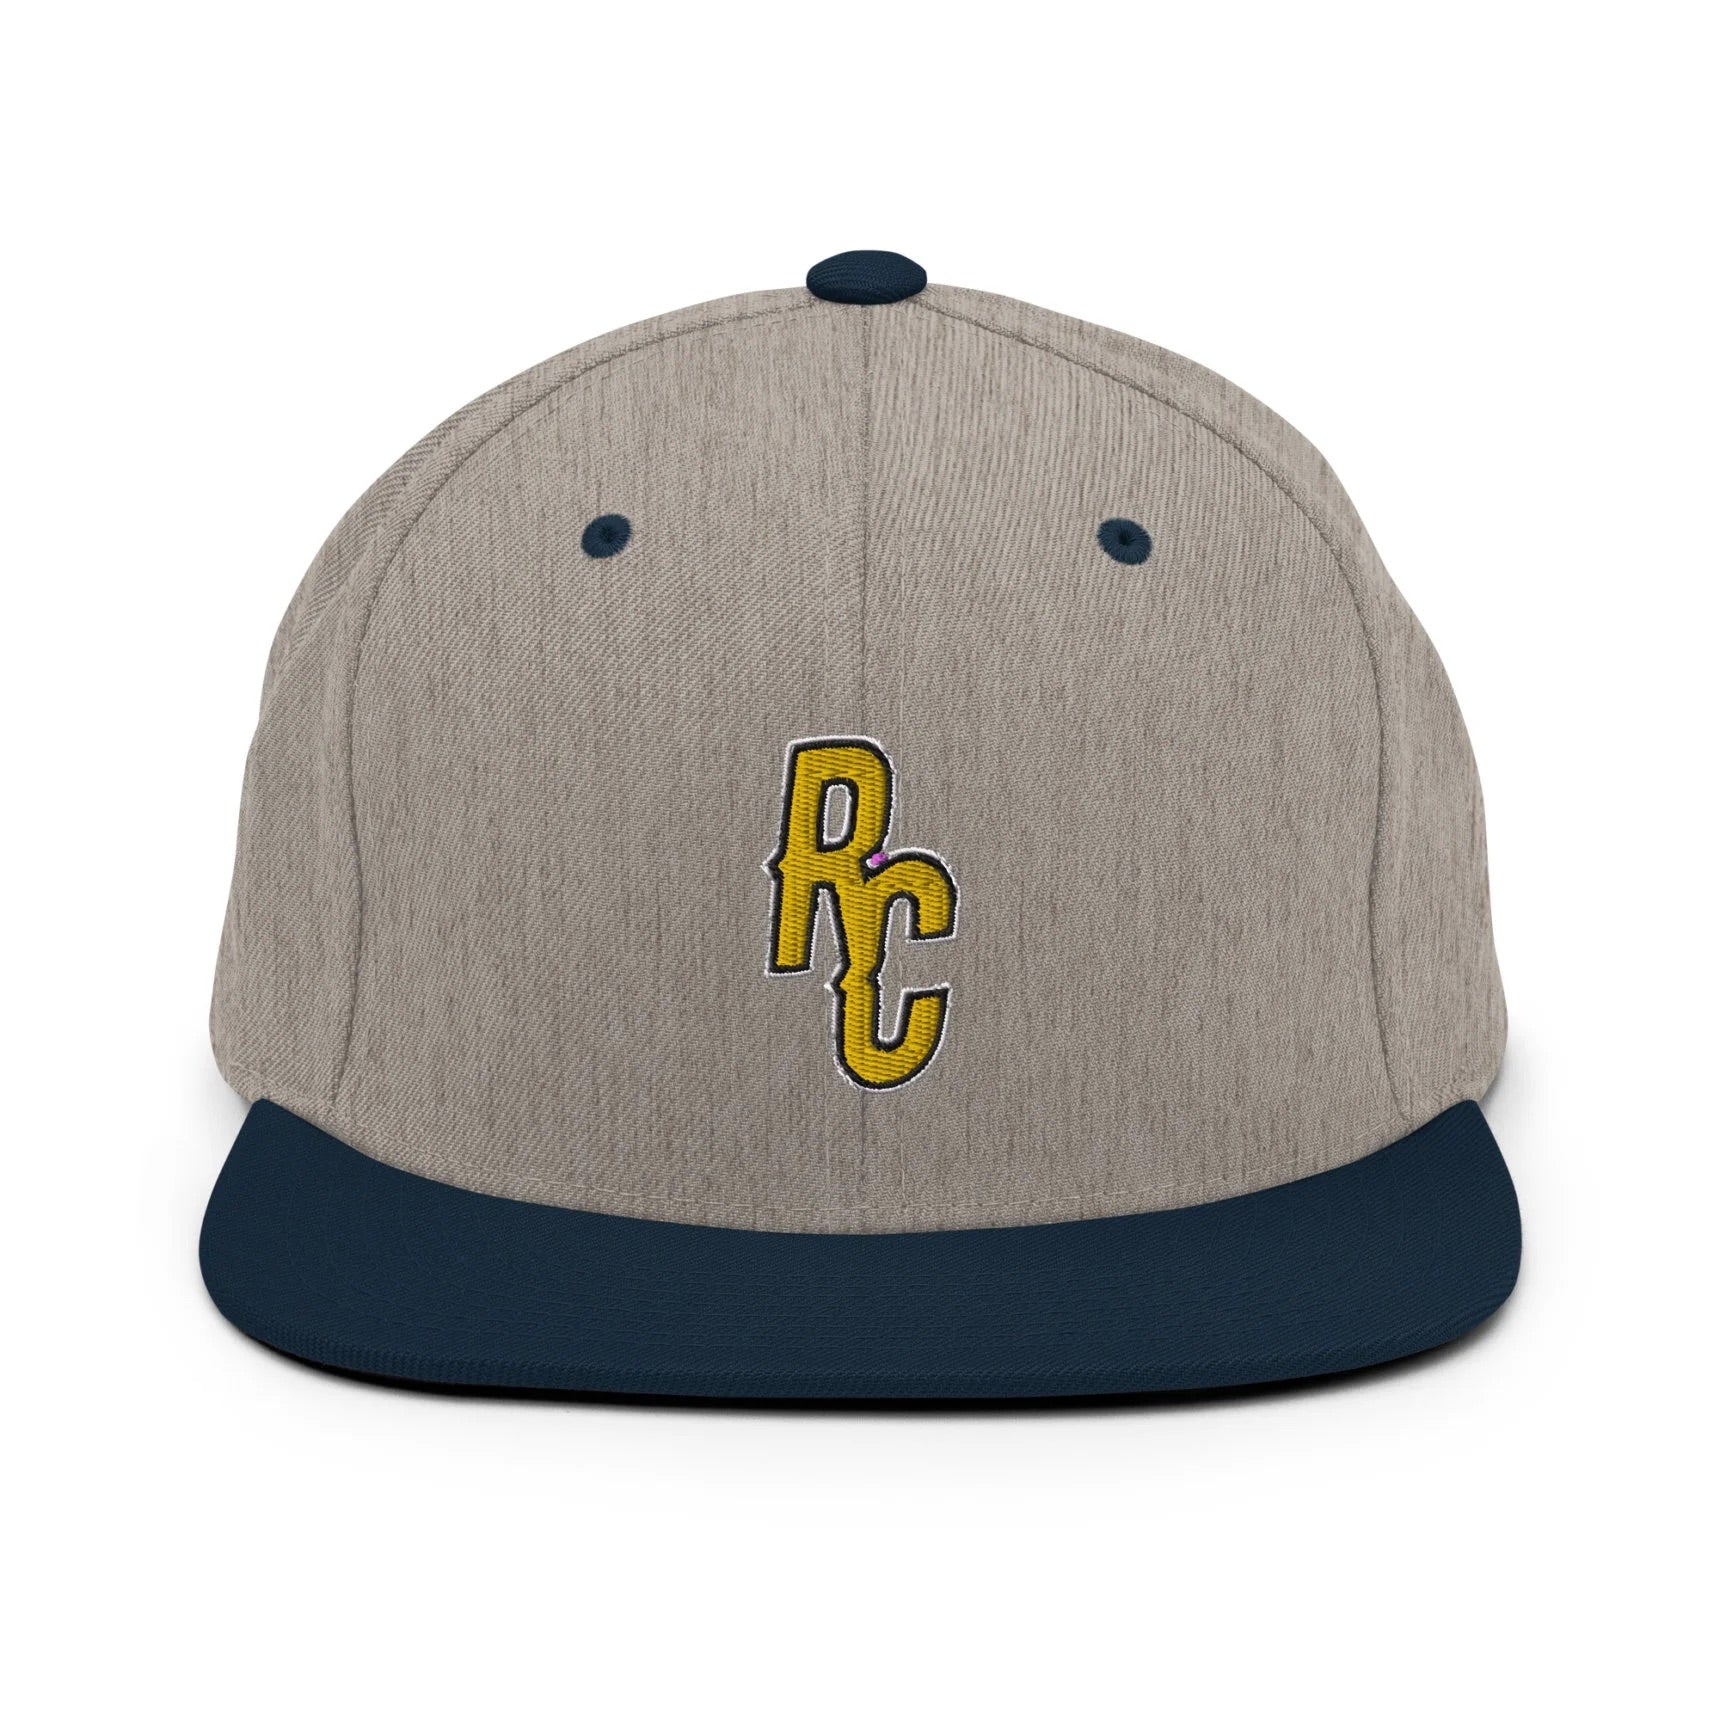 Ray Cheesy ShowZone snapback hat in heather grey with navy brim and accents